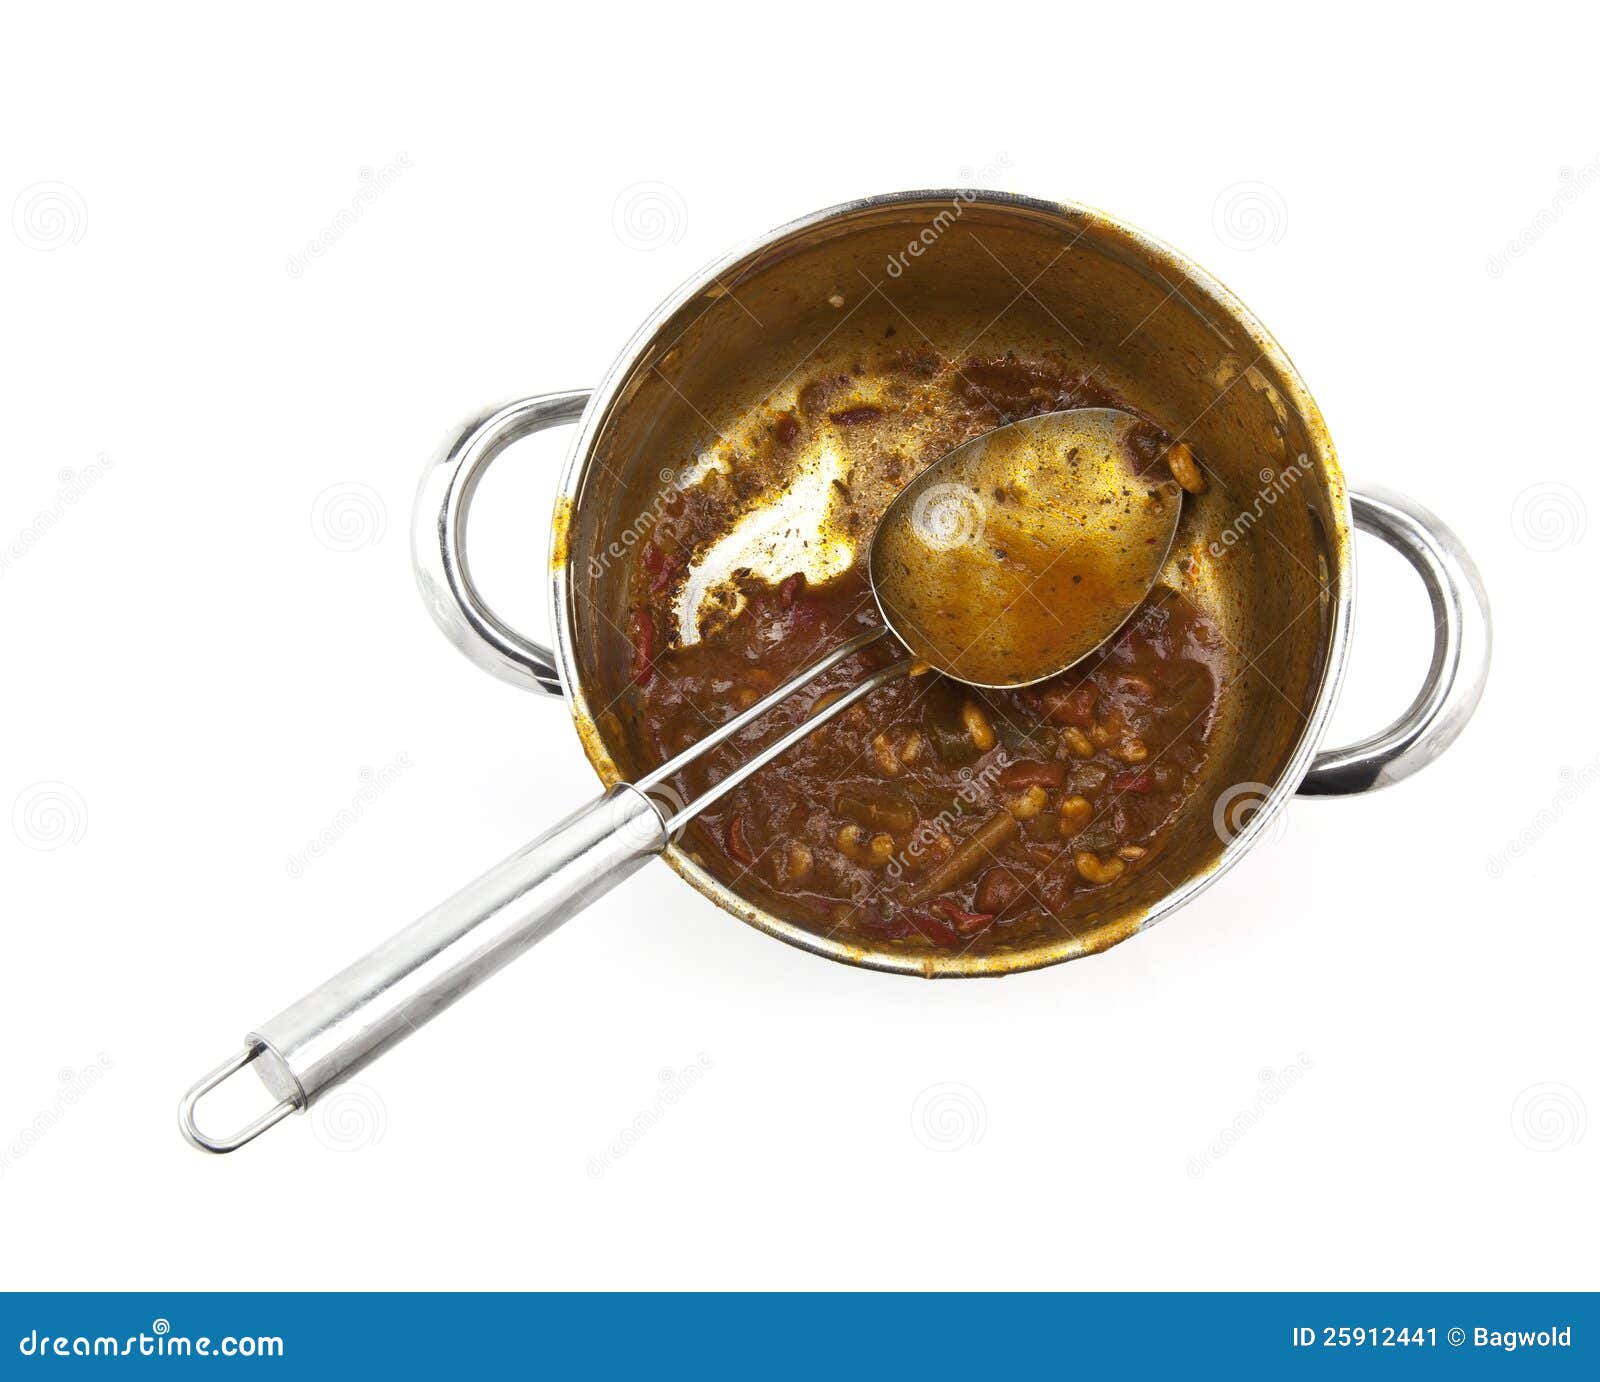 Empty Curry Pot stock image. Image of metal, asian, malay - 25912441